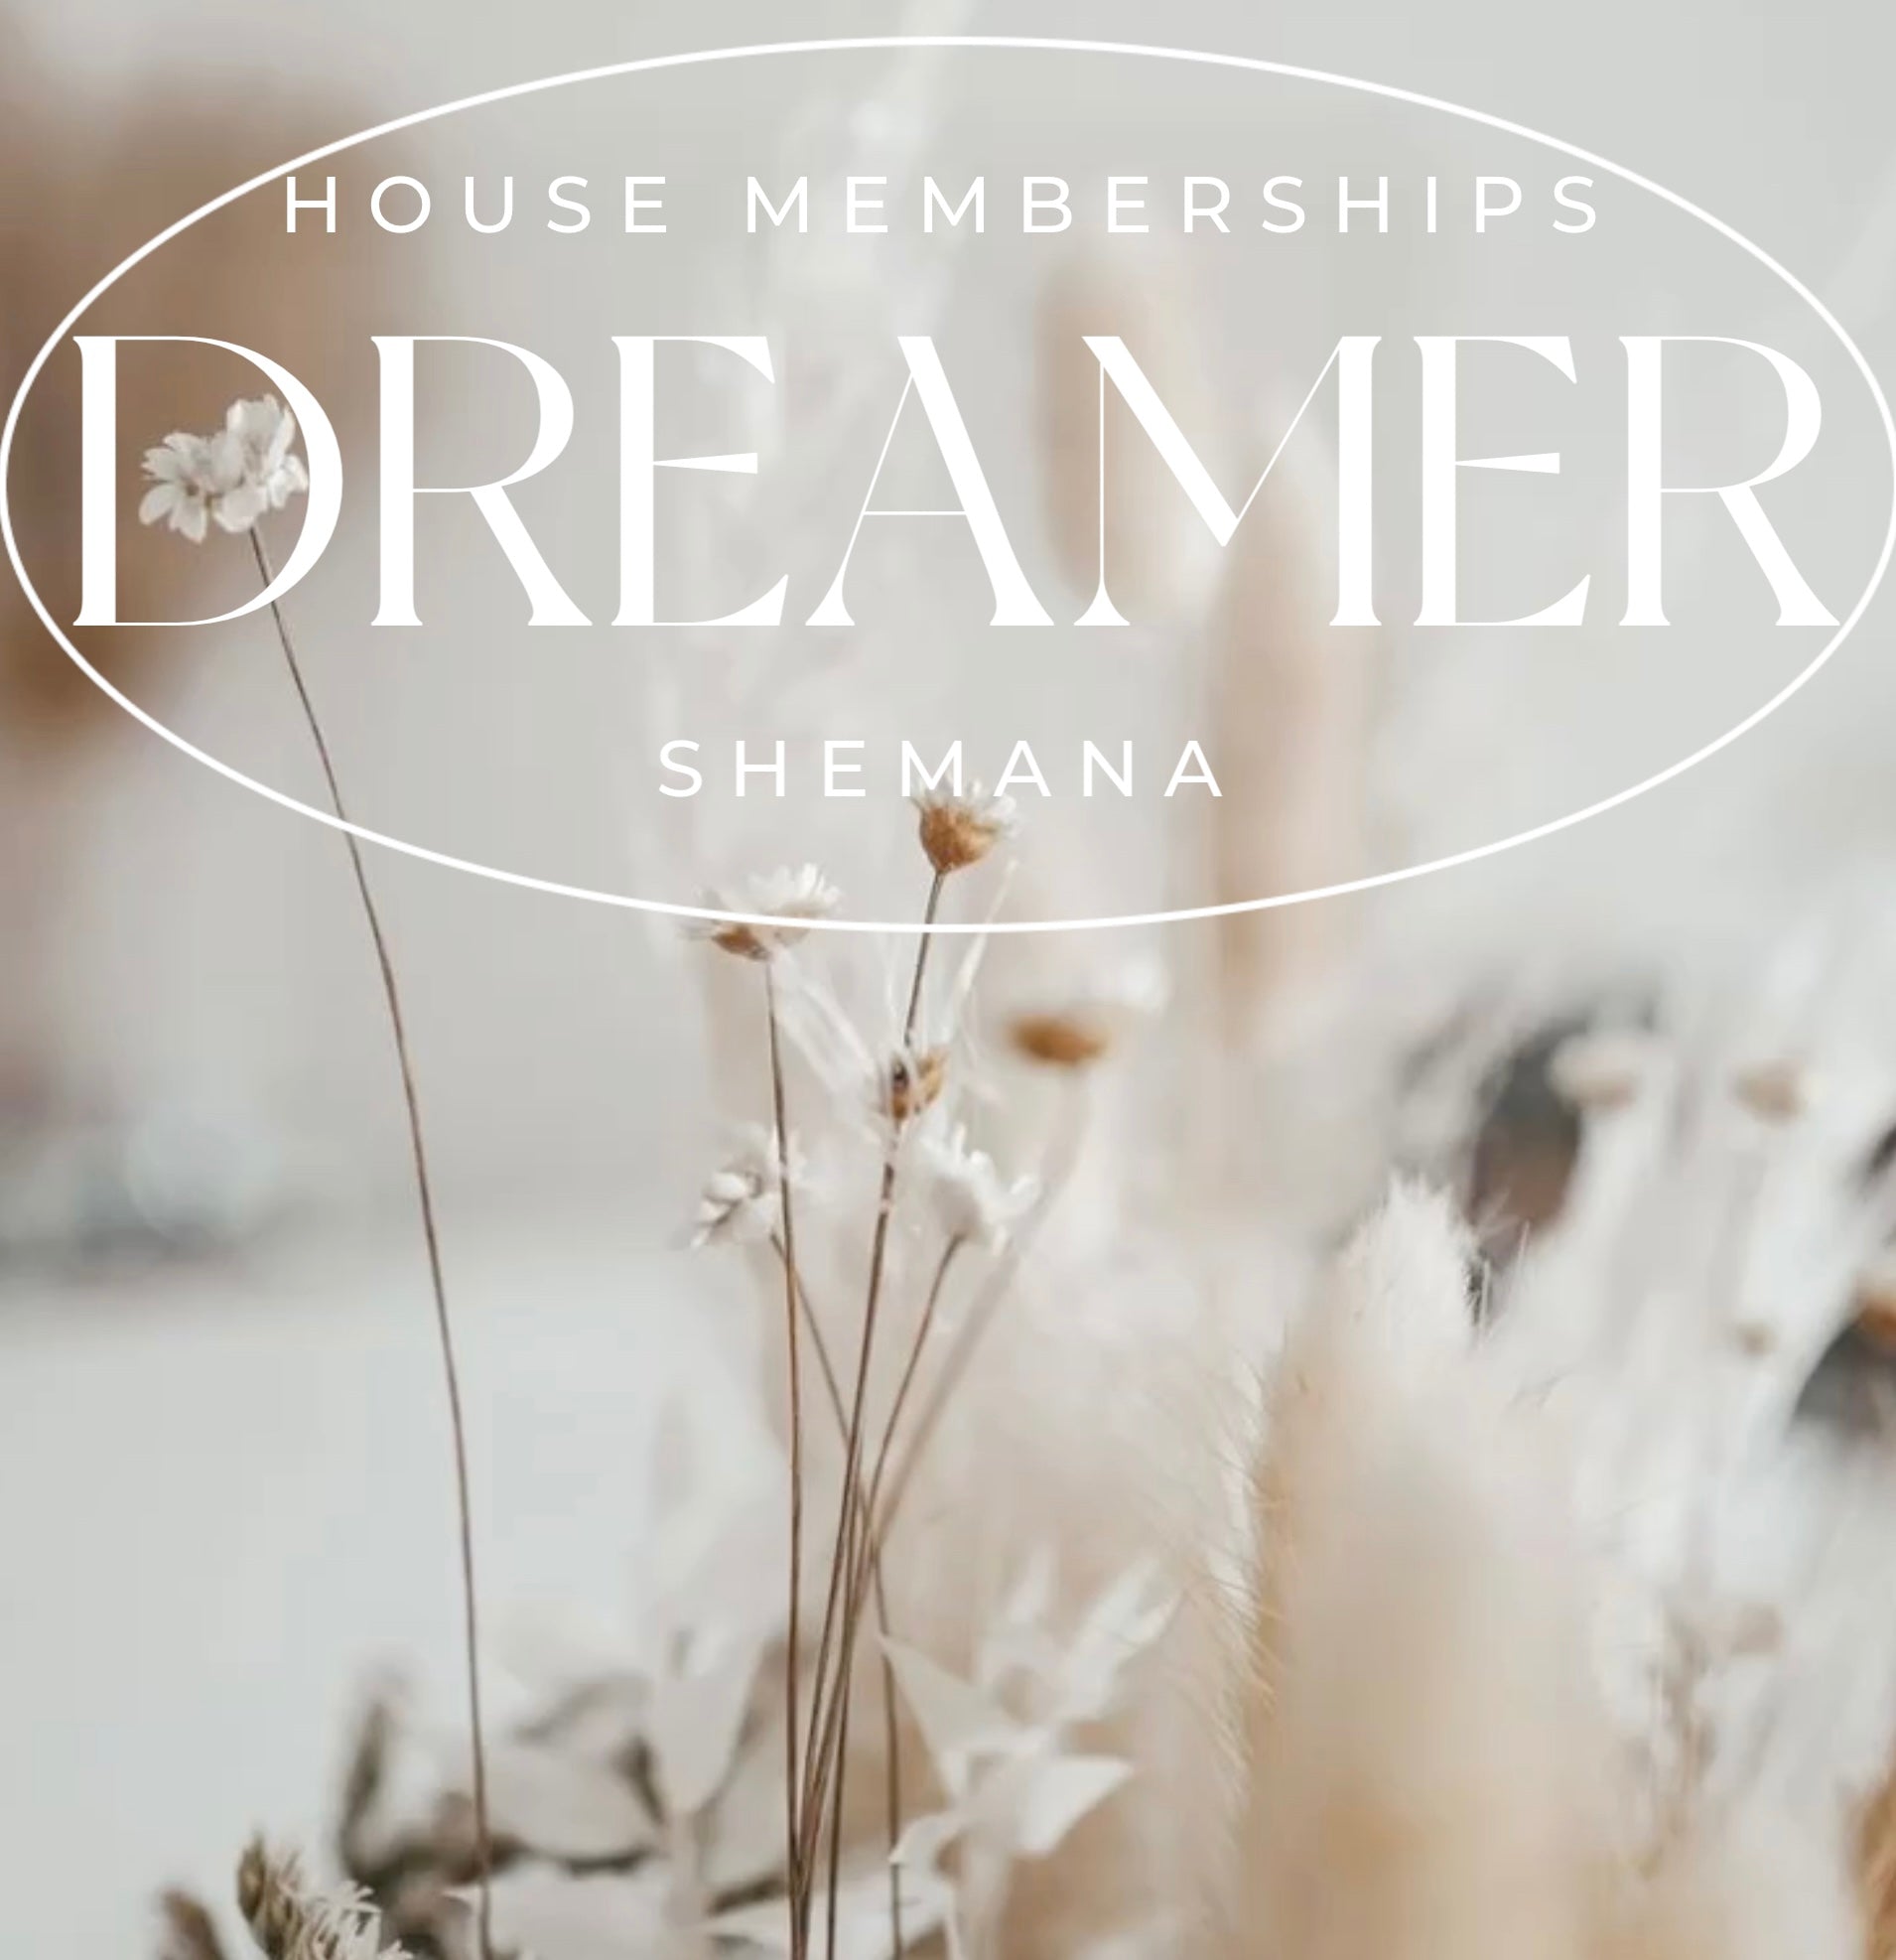 text says House Memberships Dreamer Shemana with flowers